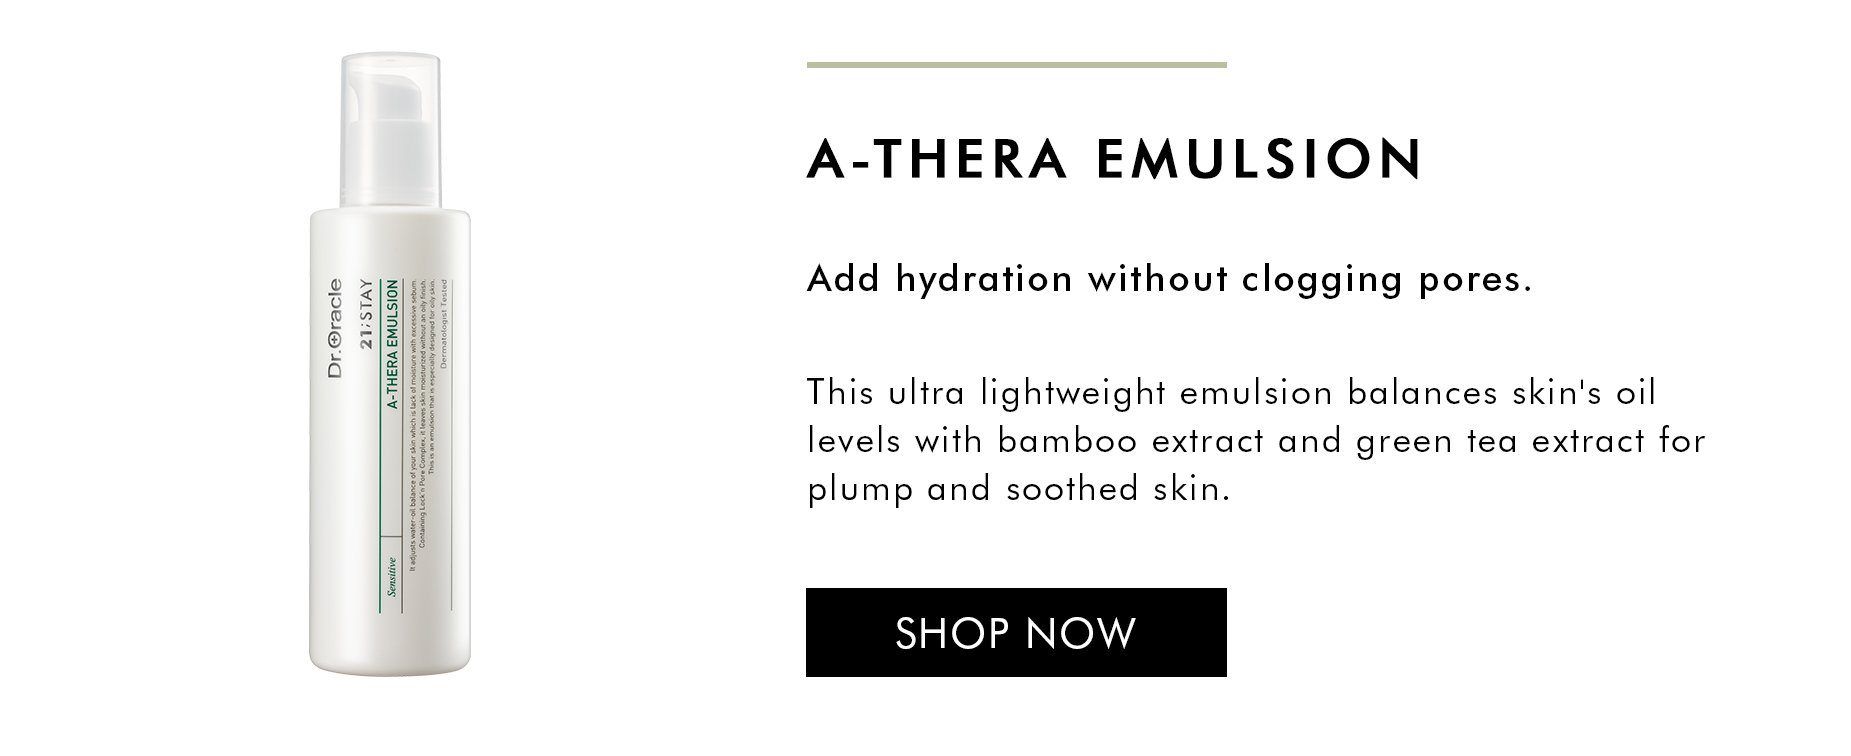 Shop A-there emulsion